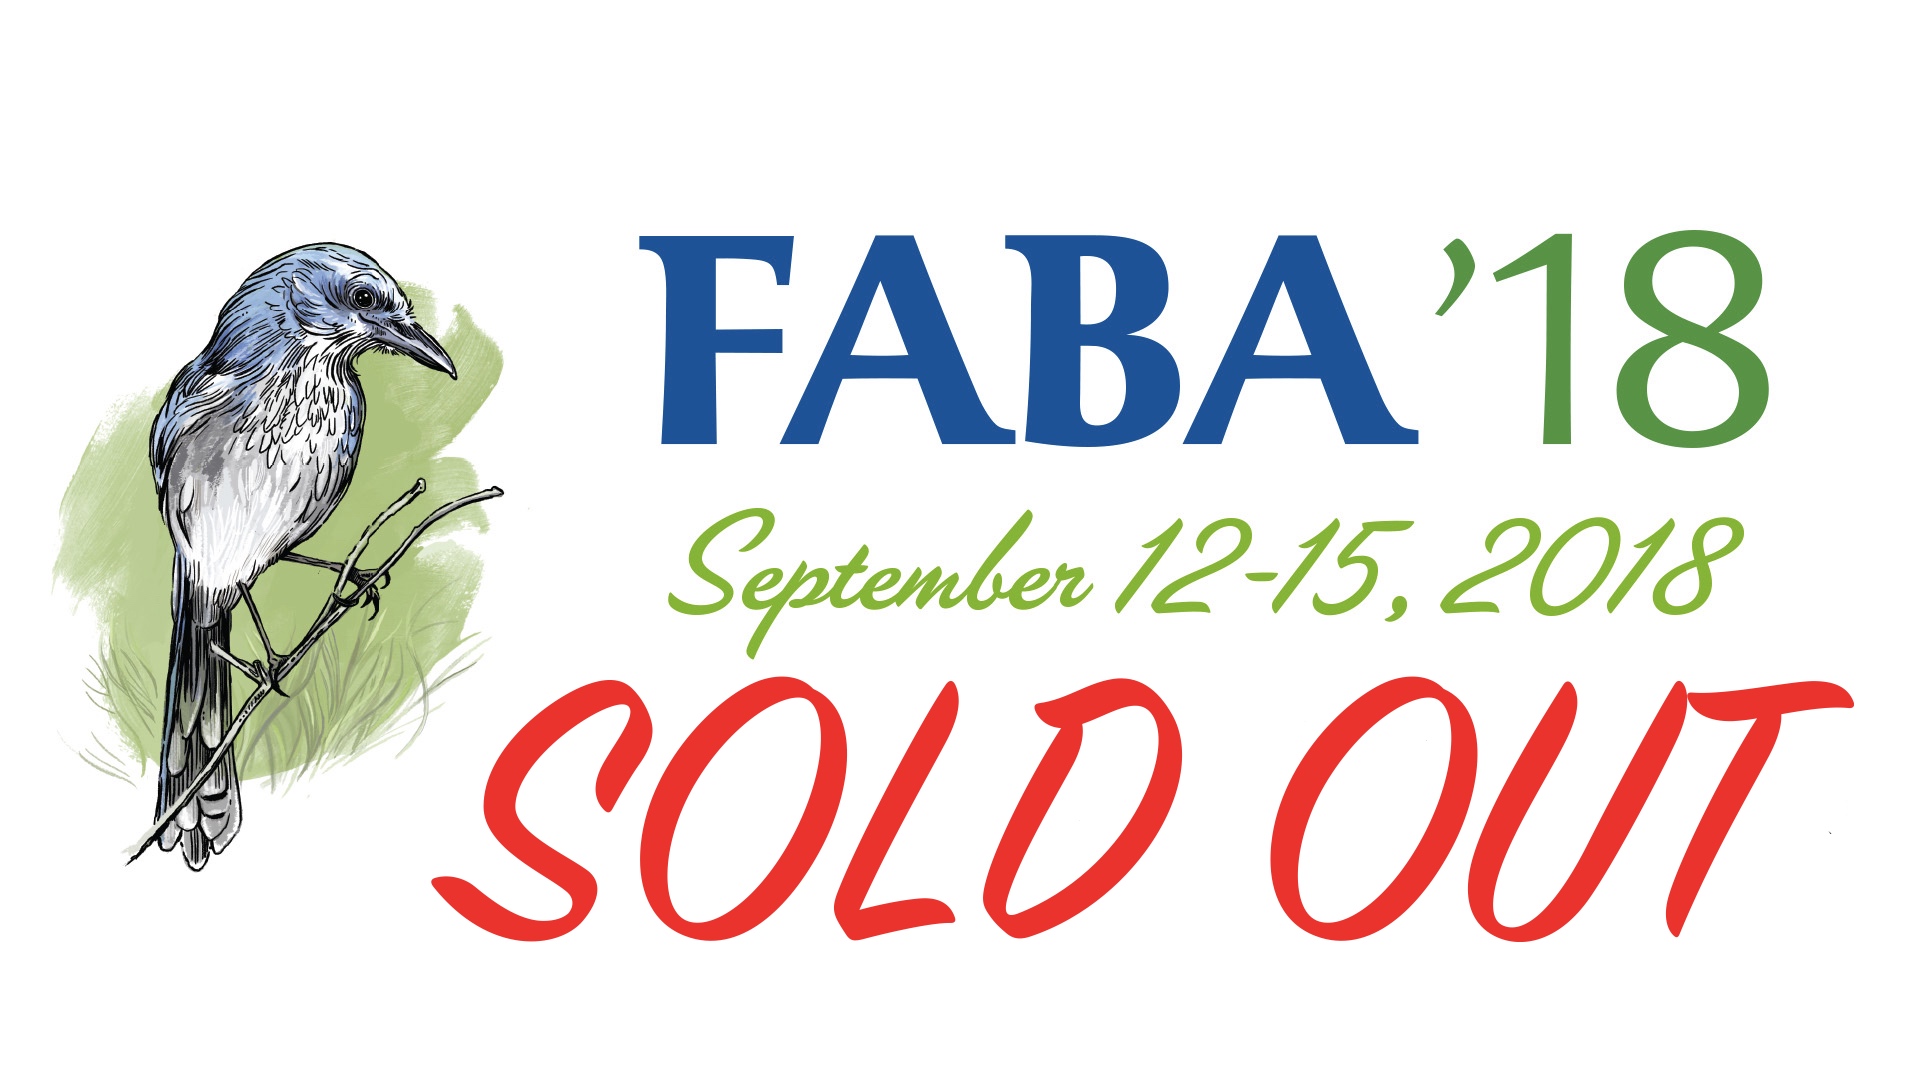 The 2018 FABA Conference is now SOLD OUT! To be placed on a wait list